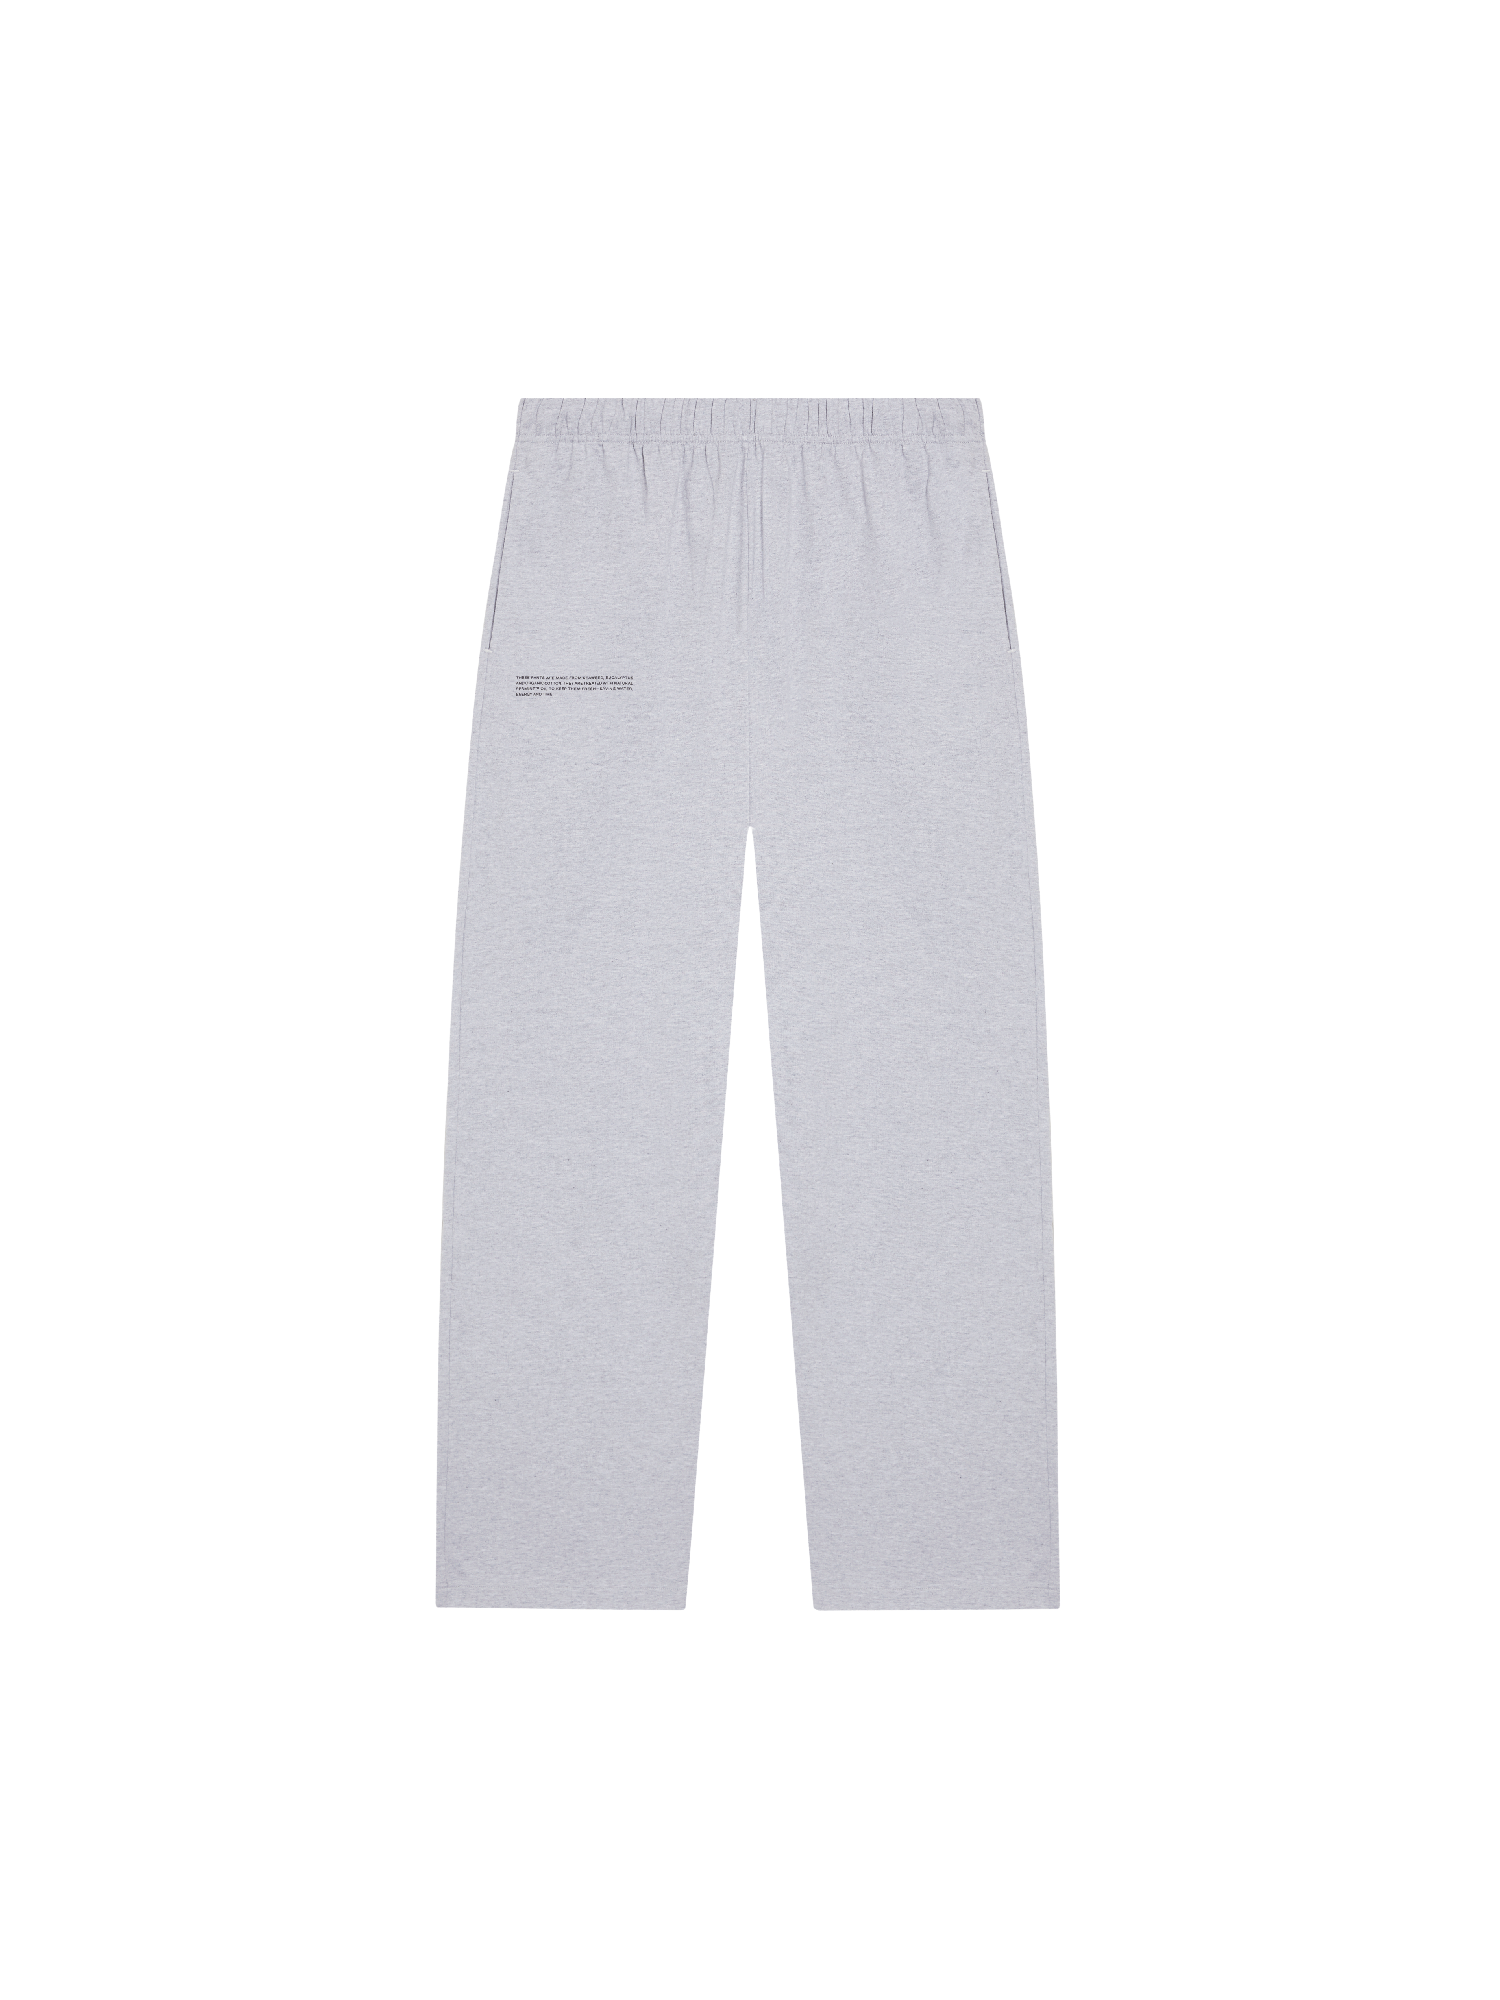 https://storage.googleapis.com/download/storage/v1/b/whering.appspot.com/o/marketplace_product_images%2Fpangaia-organic-cotton-pajama-track-pants-with-cfibergrey-marl-9fW4xq4vRKFtHQ2cDHsLXe.png?generation=1690347628108907&alt=media